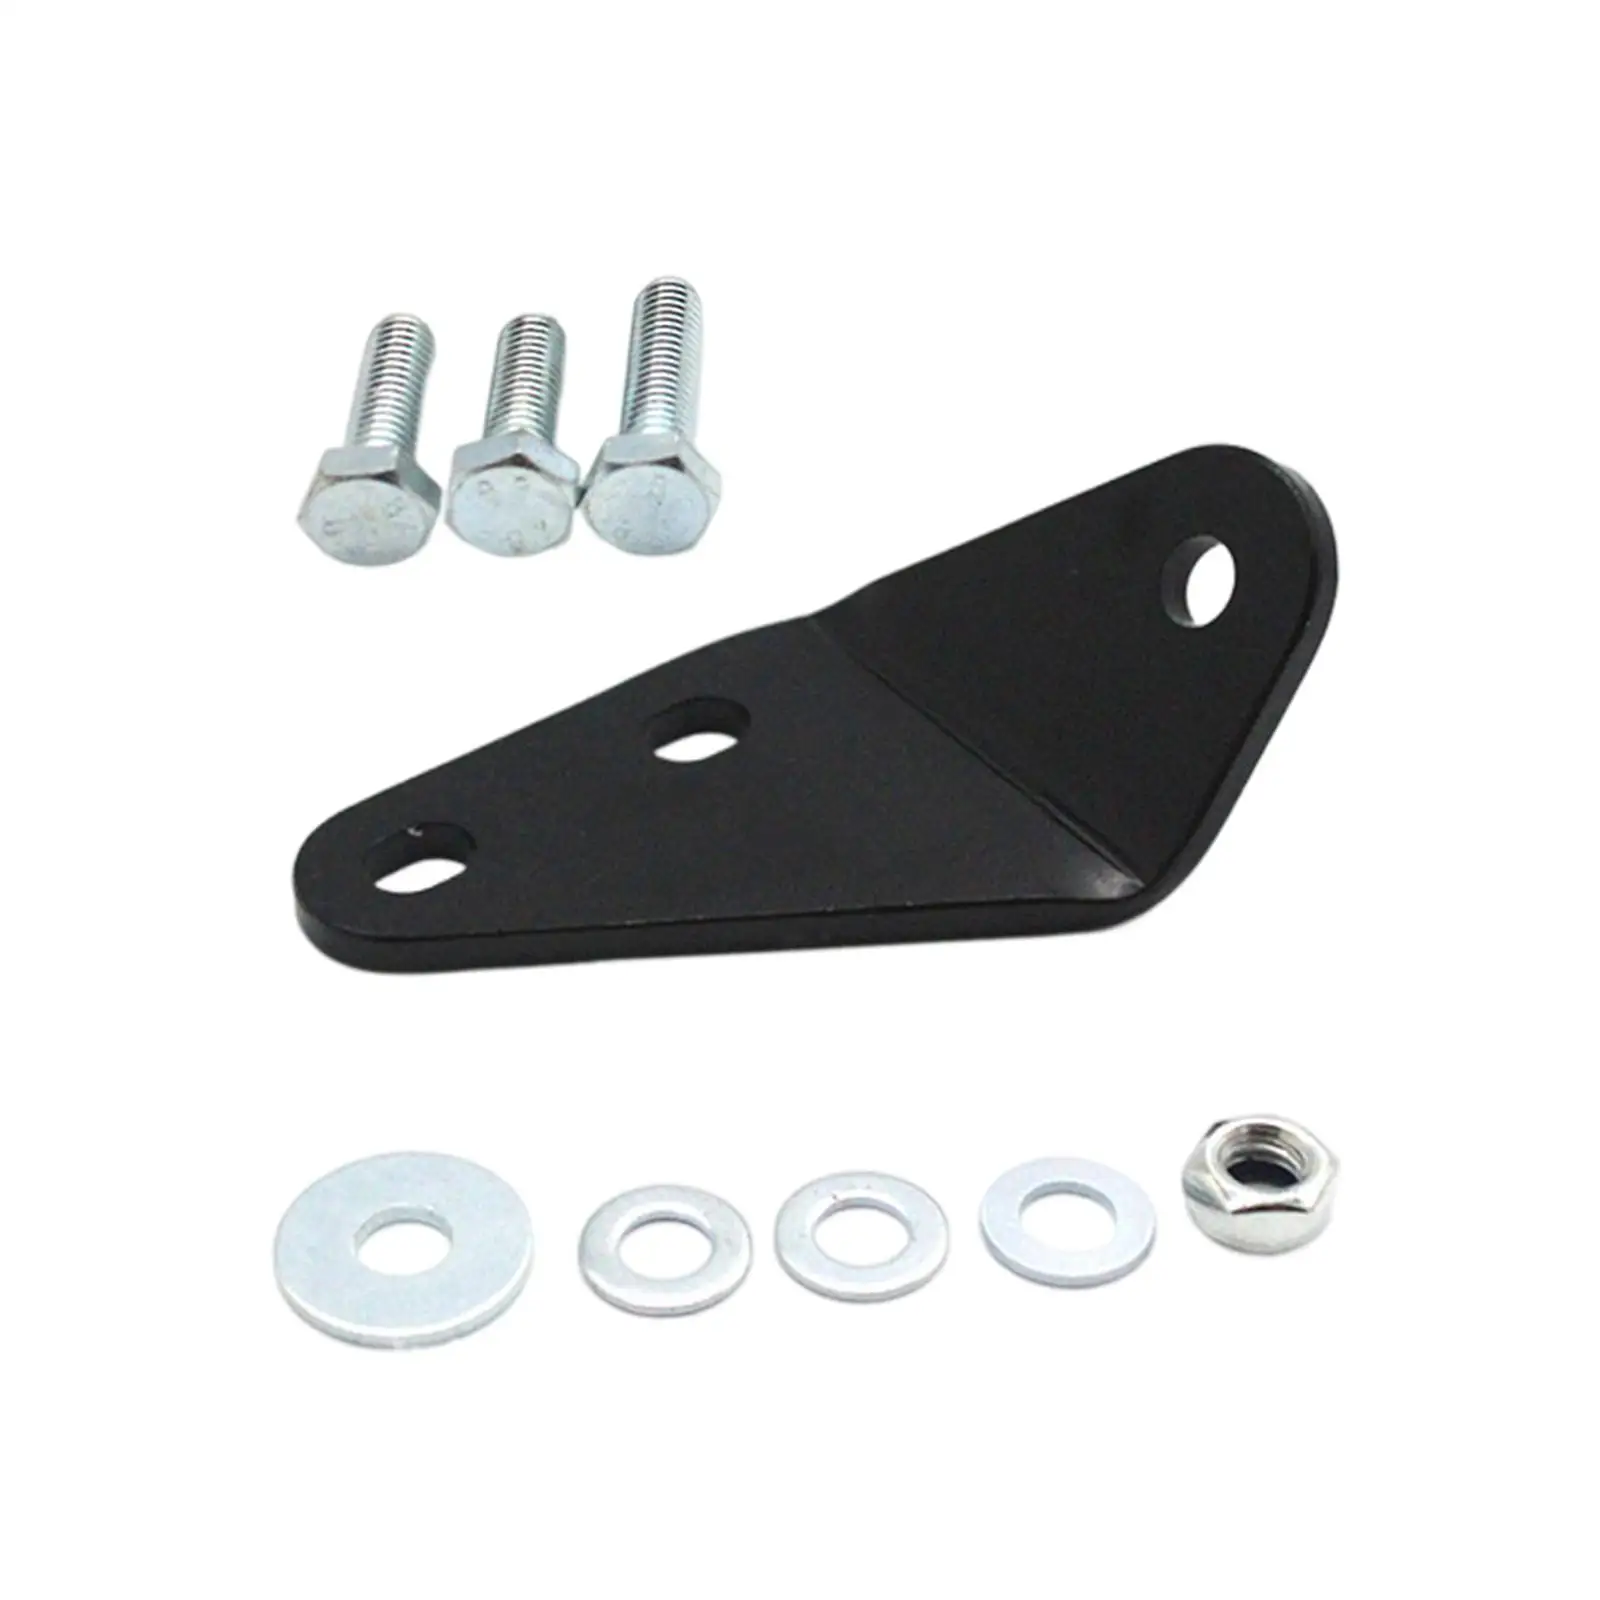 Clutch Pedal Repair Bracket Set Metal Easy Installation Directly Replace Durable for VW T4 Transporter Multivan Accessories